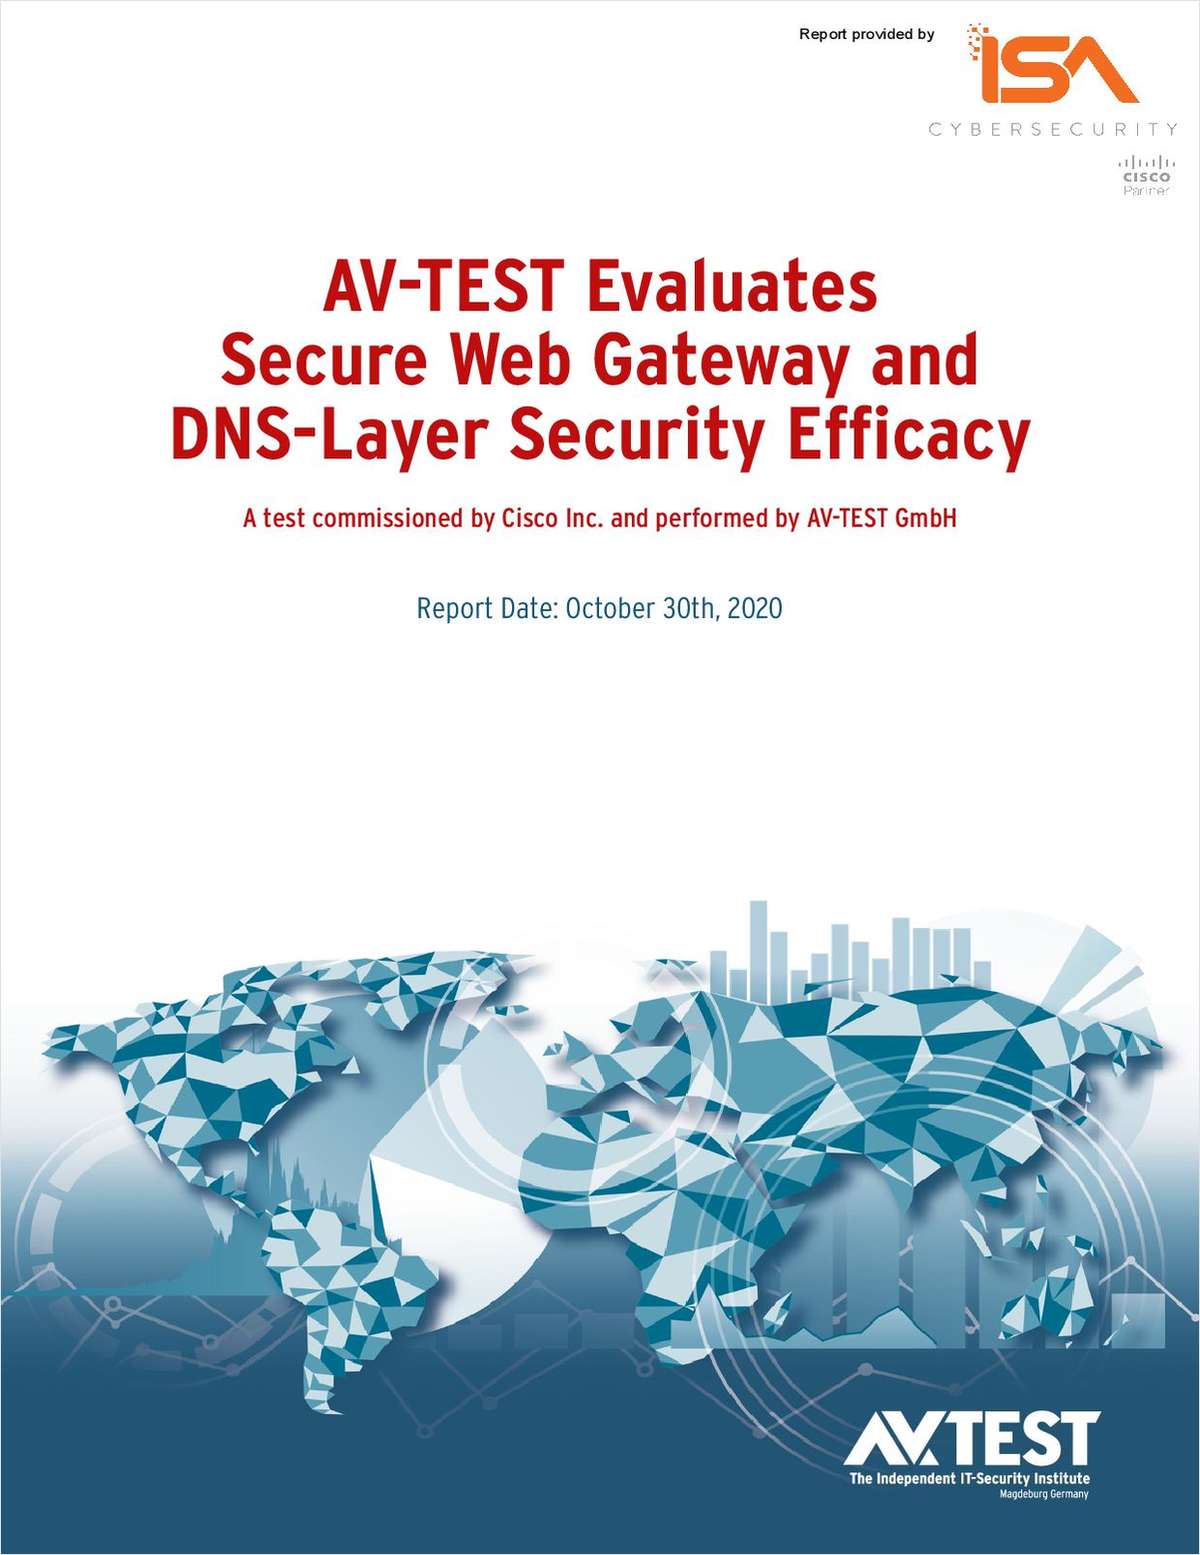 Secure web gateway and DNS-layer security efficacy